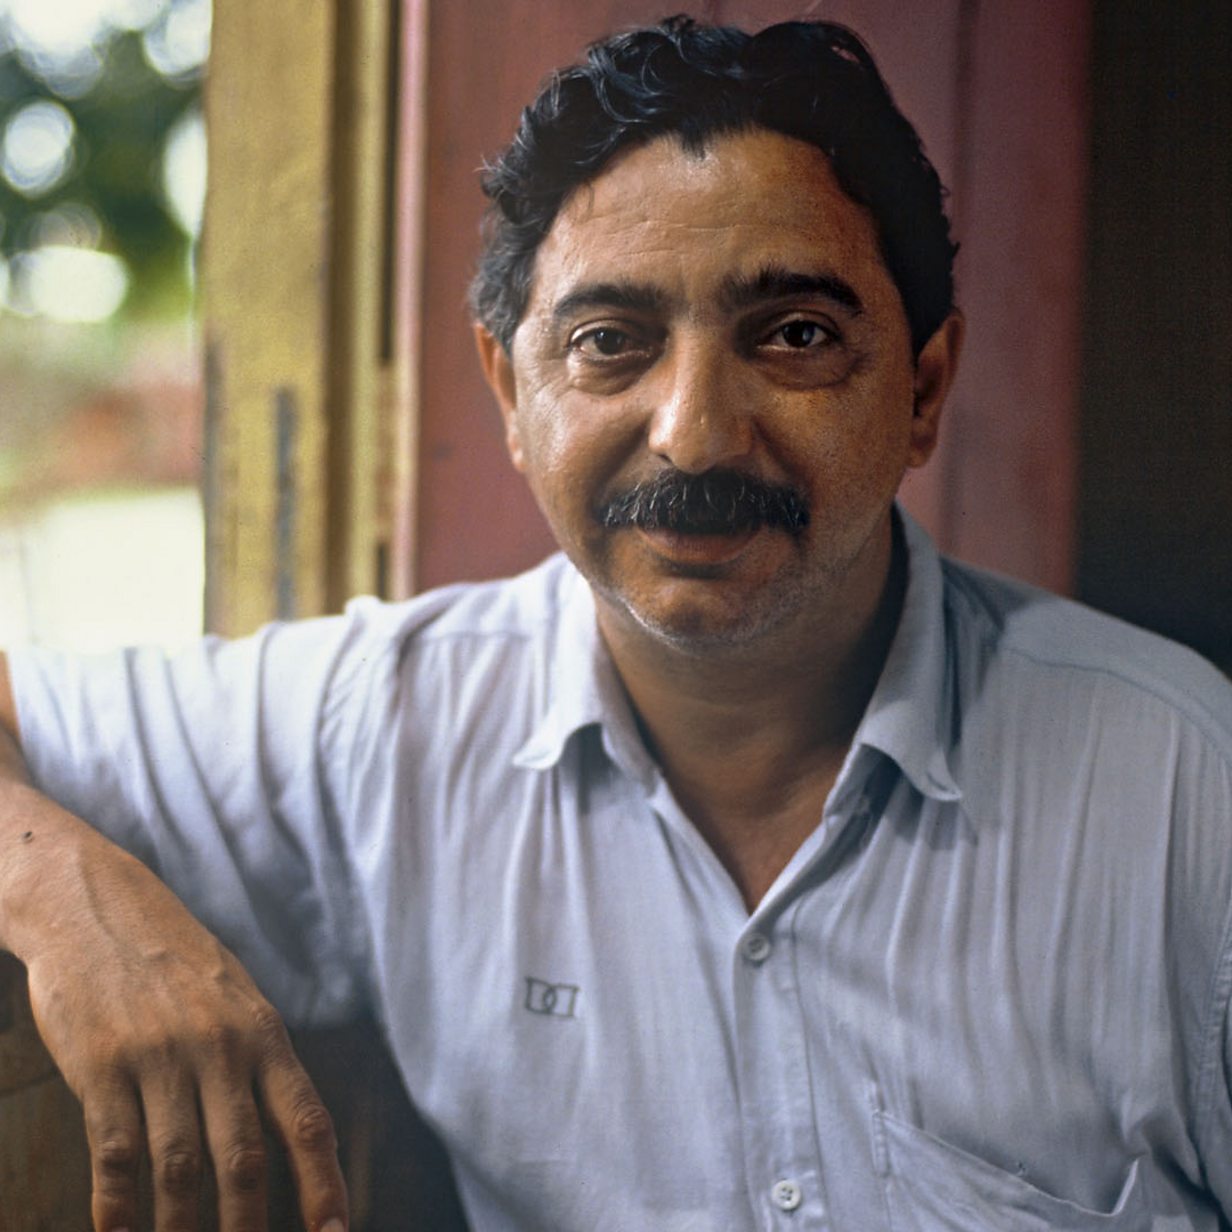 Chico Mendes - Brazilian trade unionist killed for his work on behalf of  ian Indians [biography]